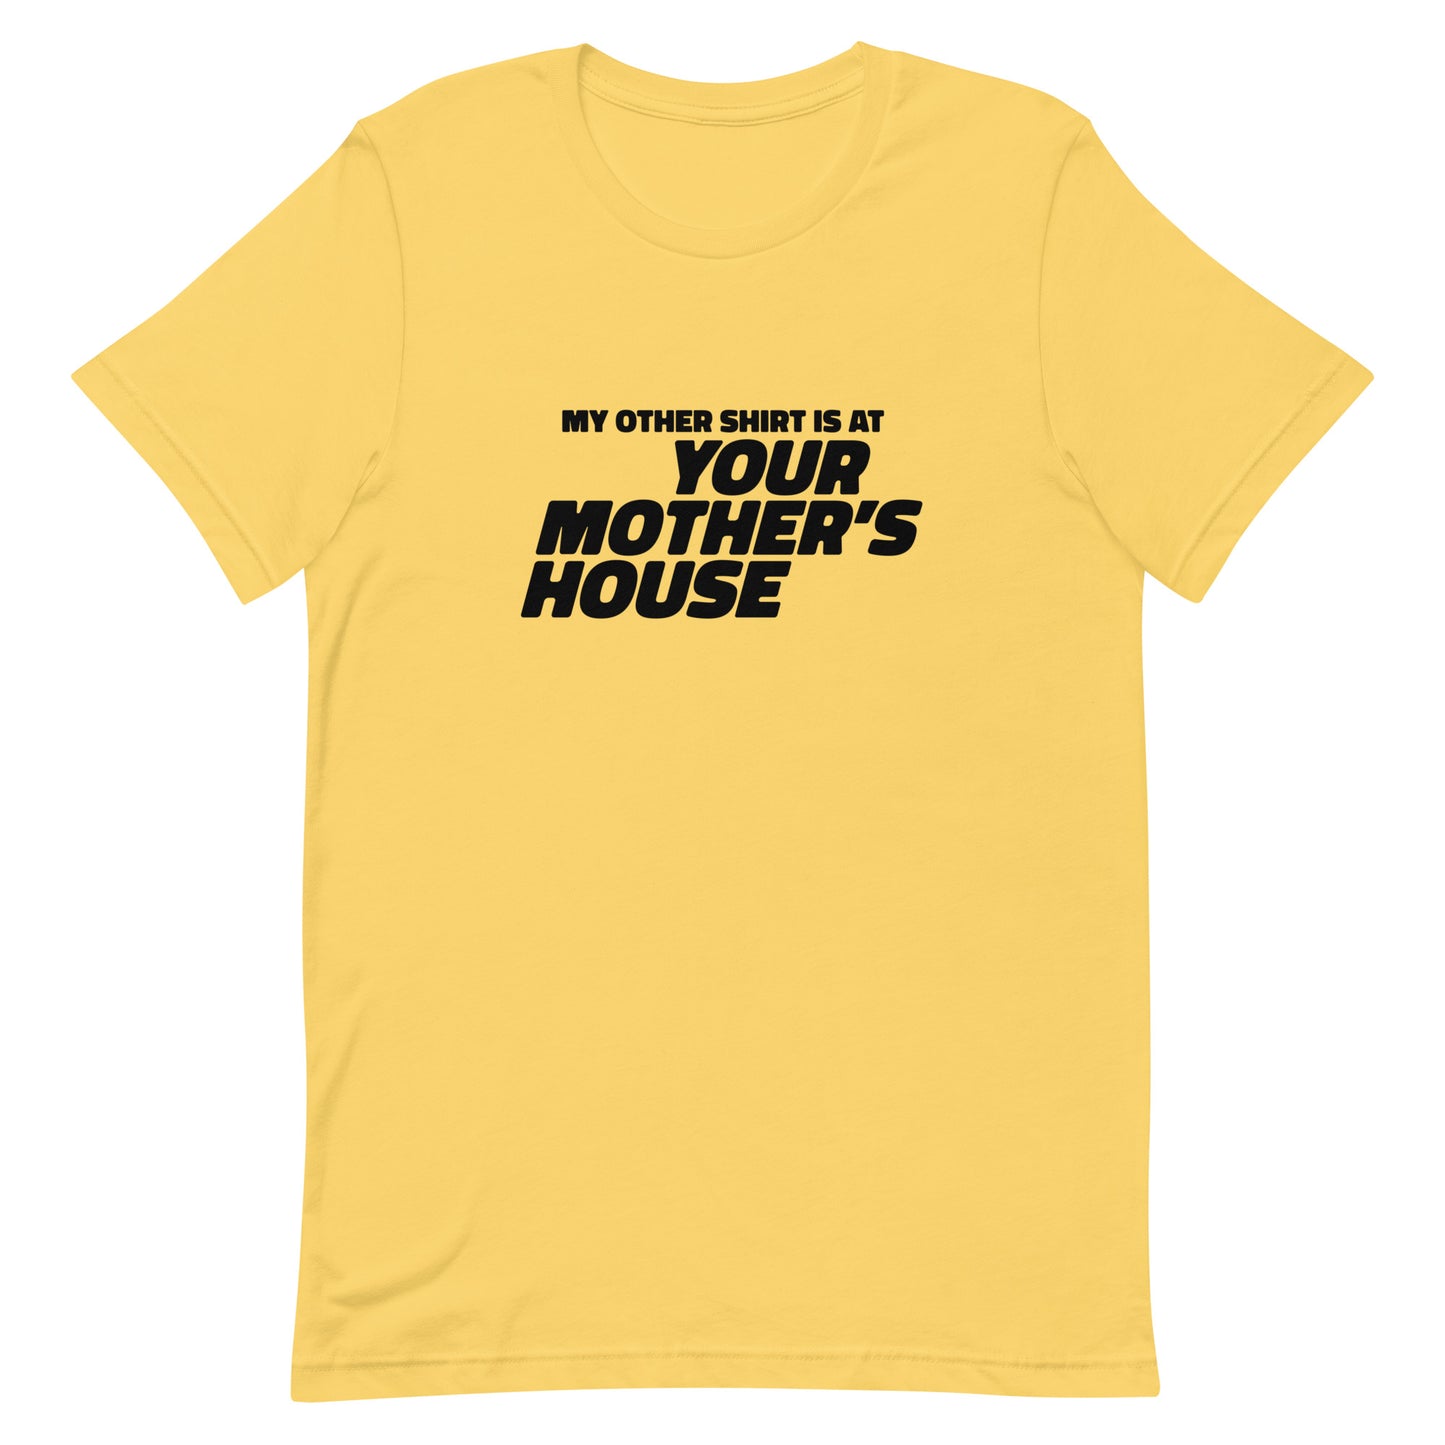 My Other Shirt is at Your Mother's House Unisex t-shirt